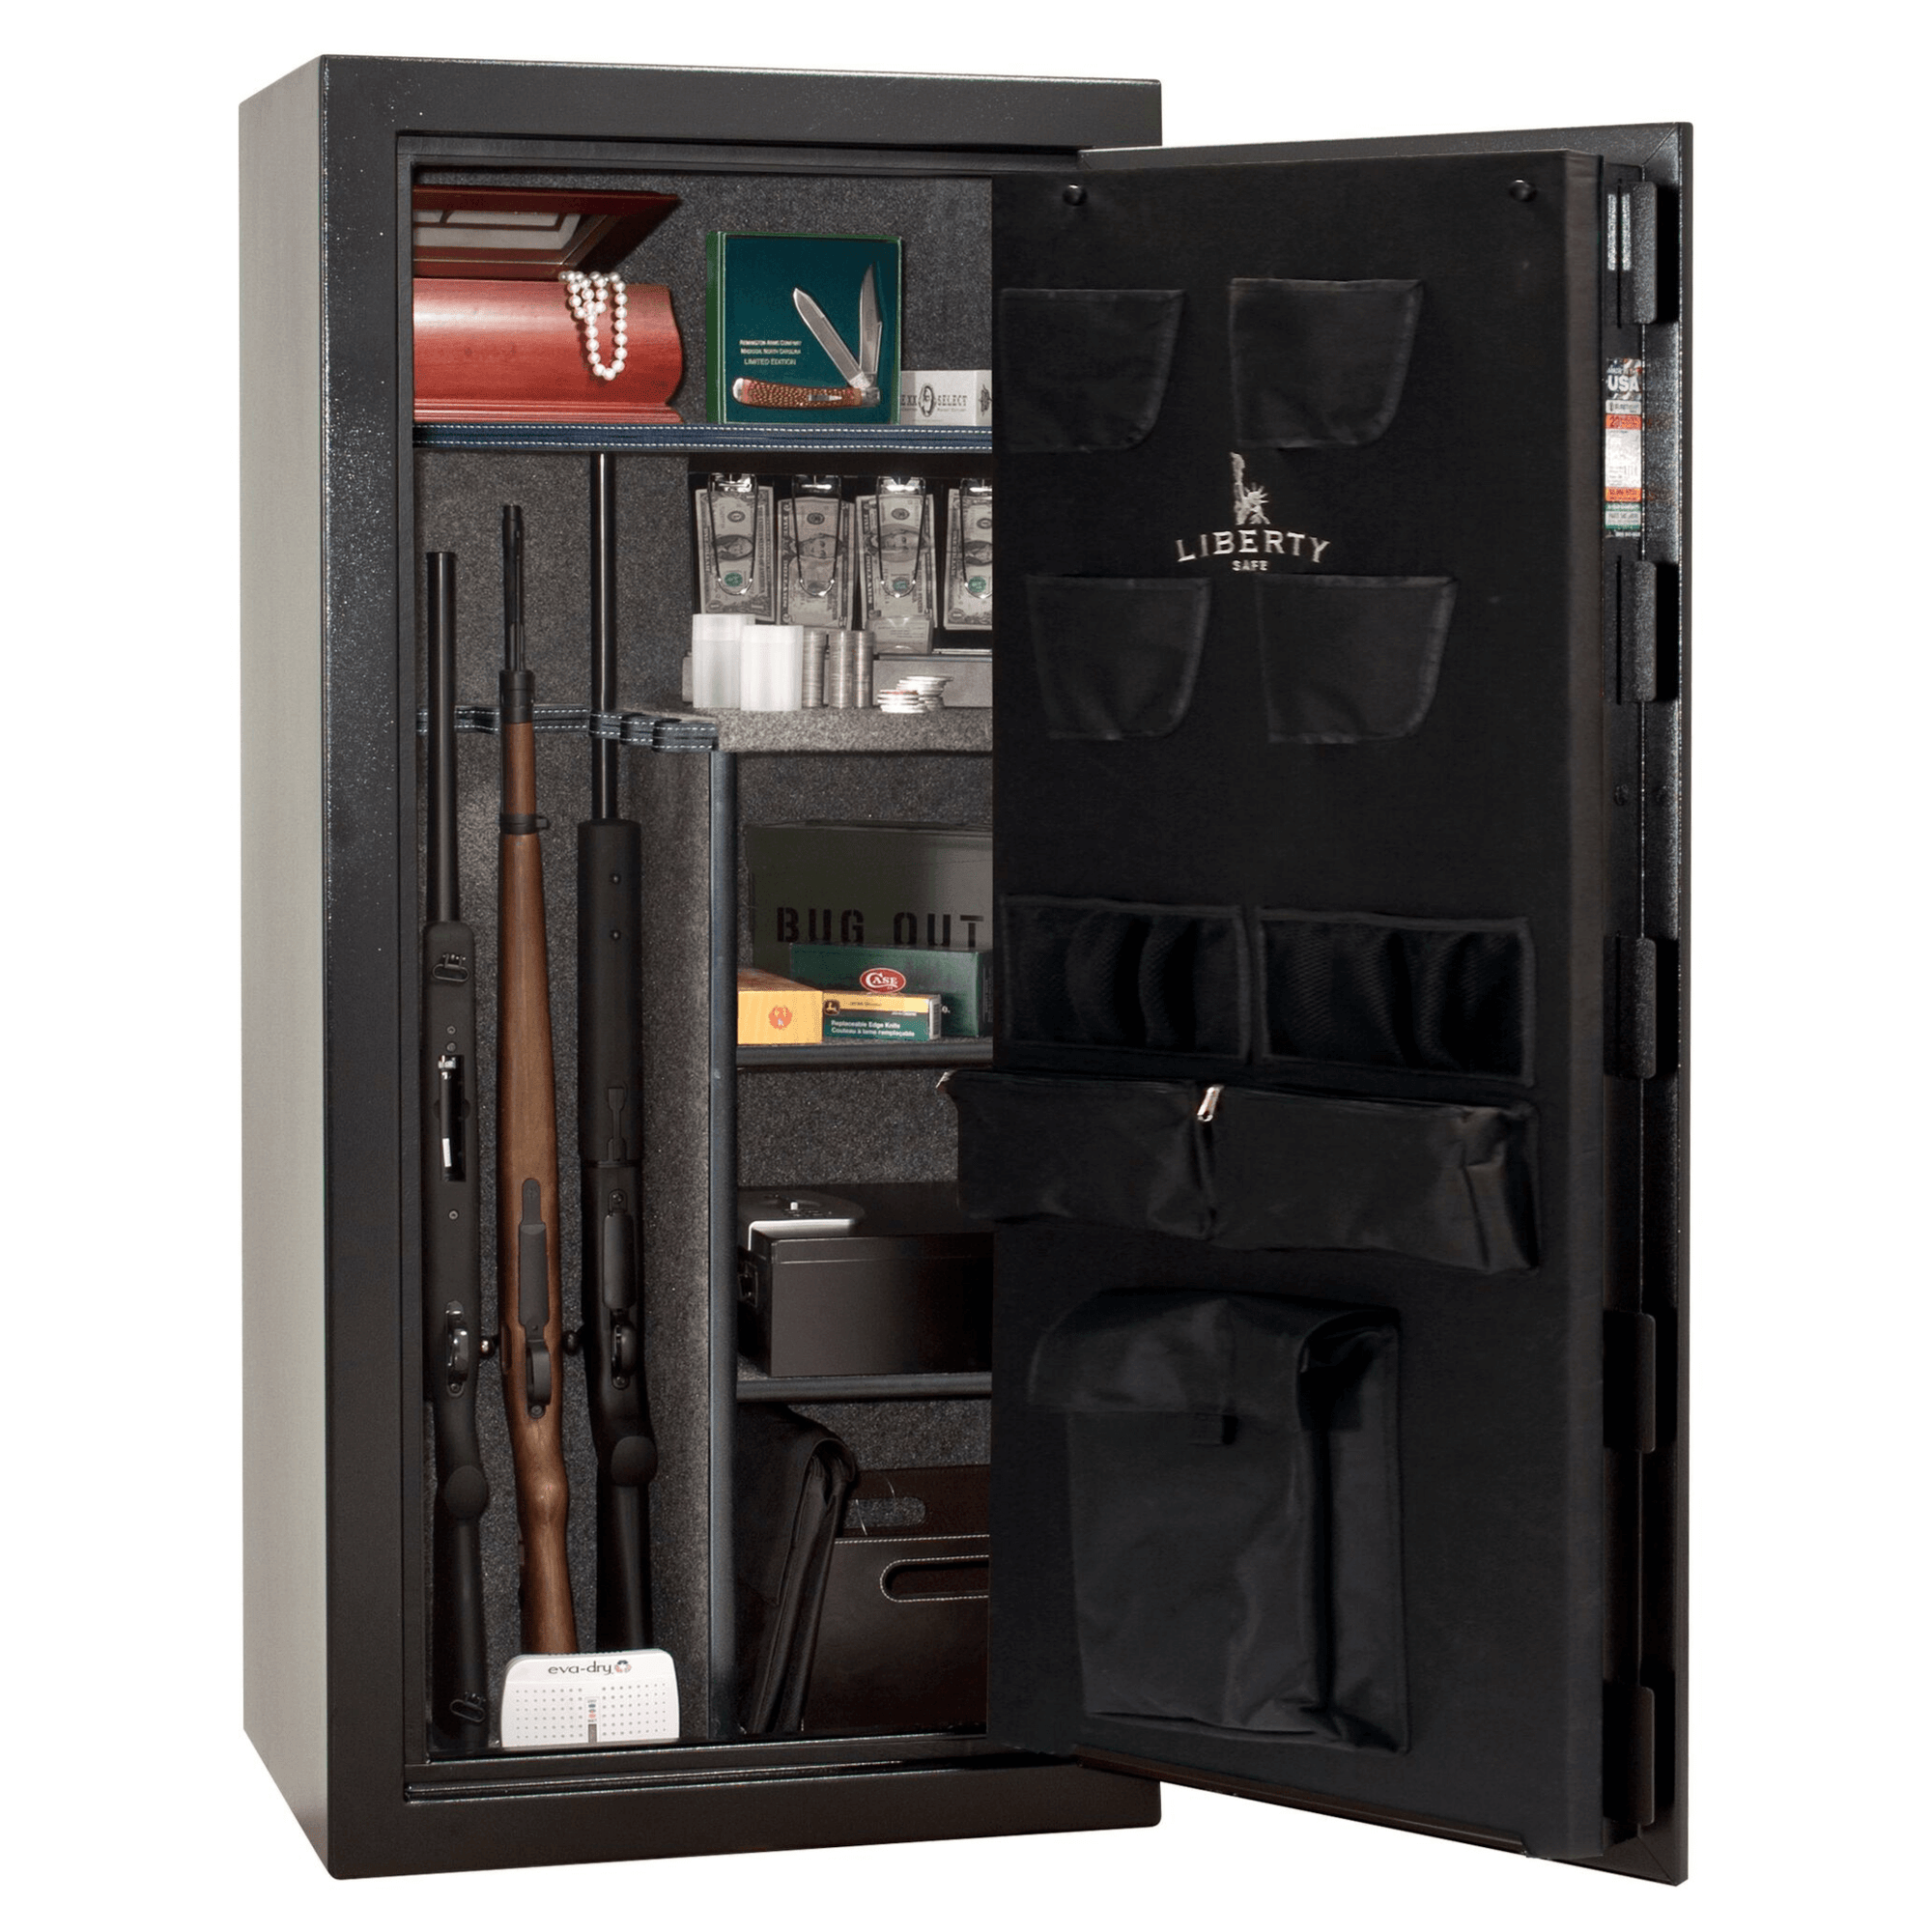 Centurion DLX | 24 | Level 1 Security | 40 Minute Fire Protection | Liberty Safe Norcal.